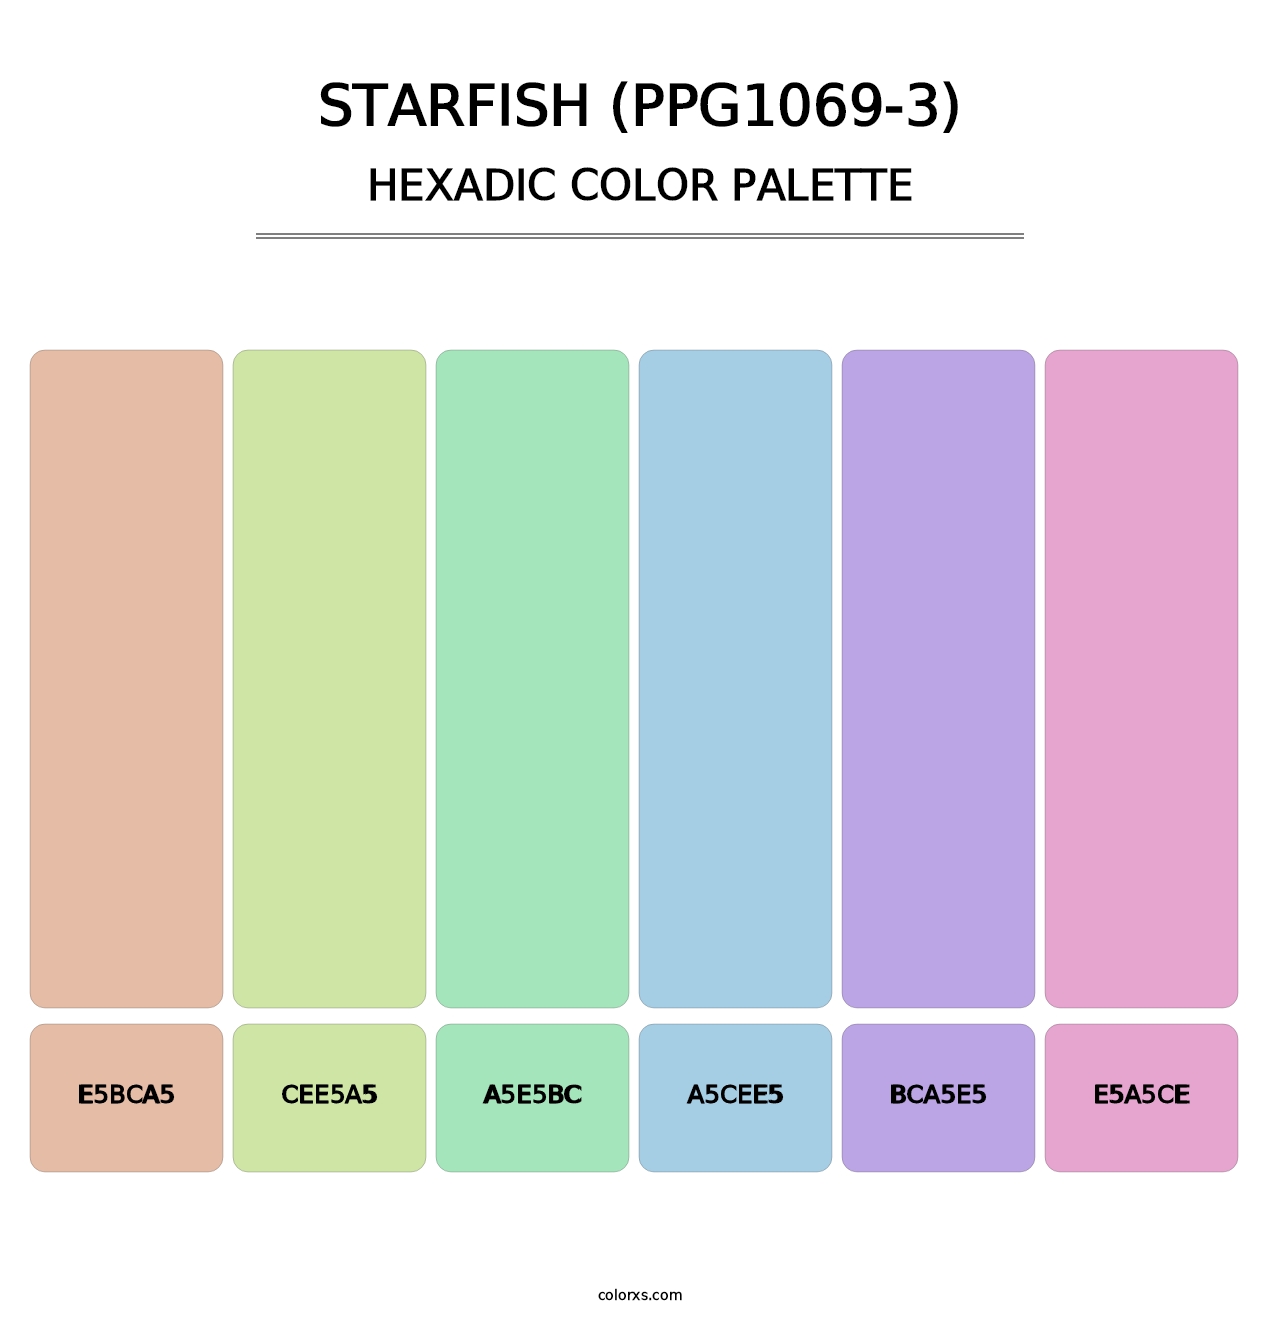 Starfish (PPG1069-3) - Hexadic Color Palette